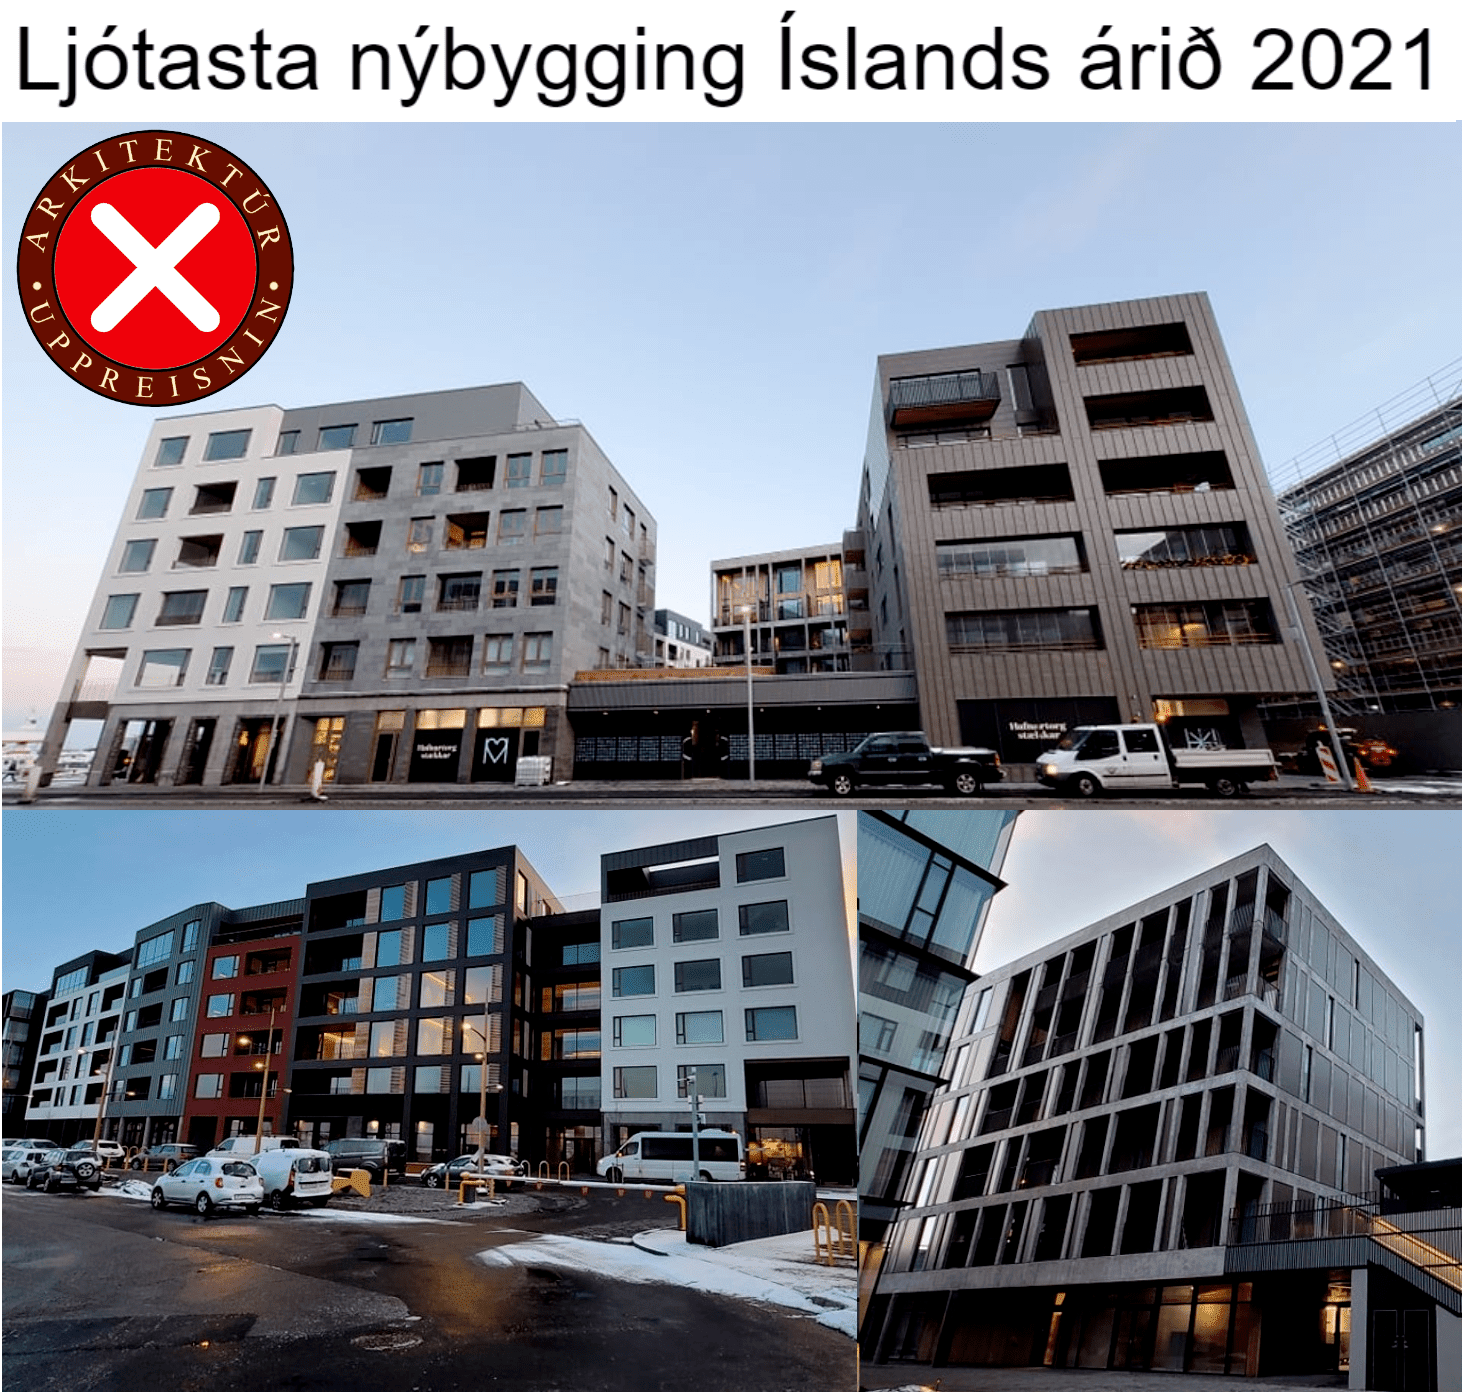 Is Austurhöfn on Iceland the ugliest new building in the nordic countries?